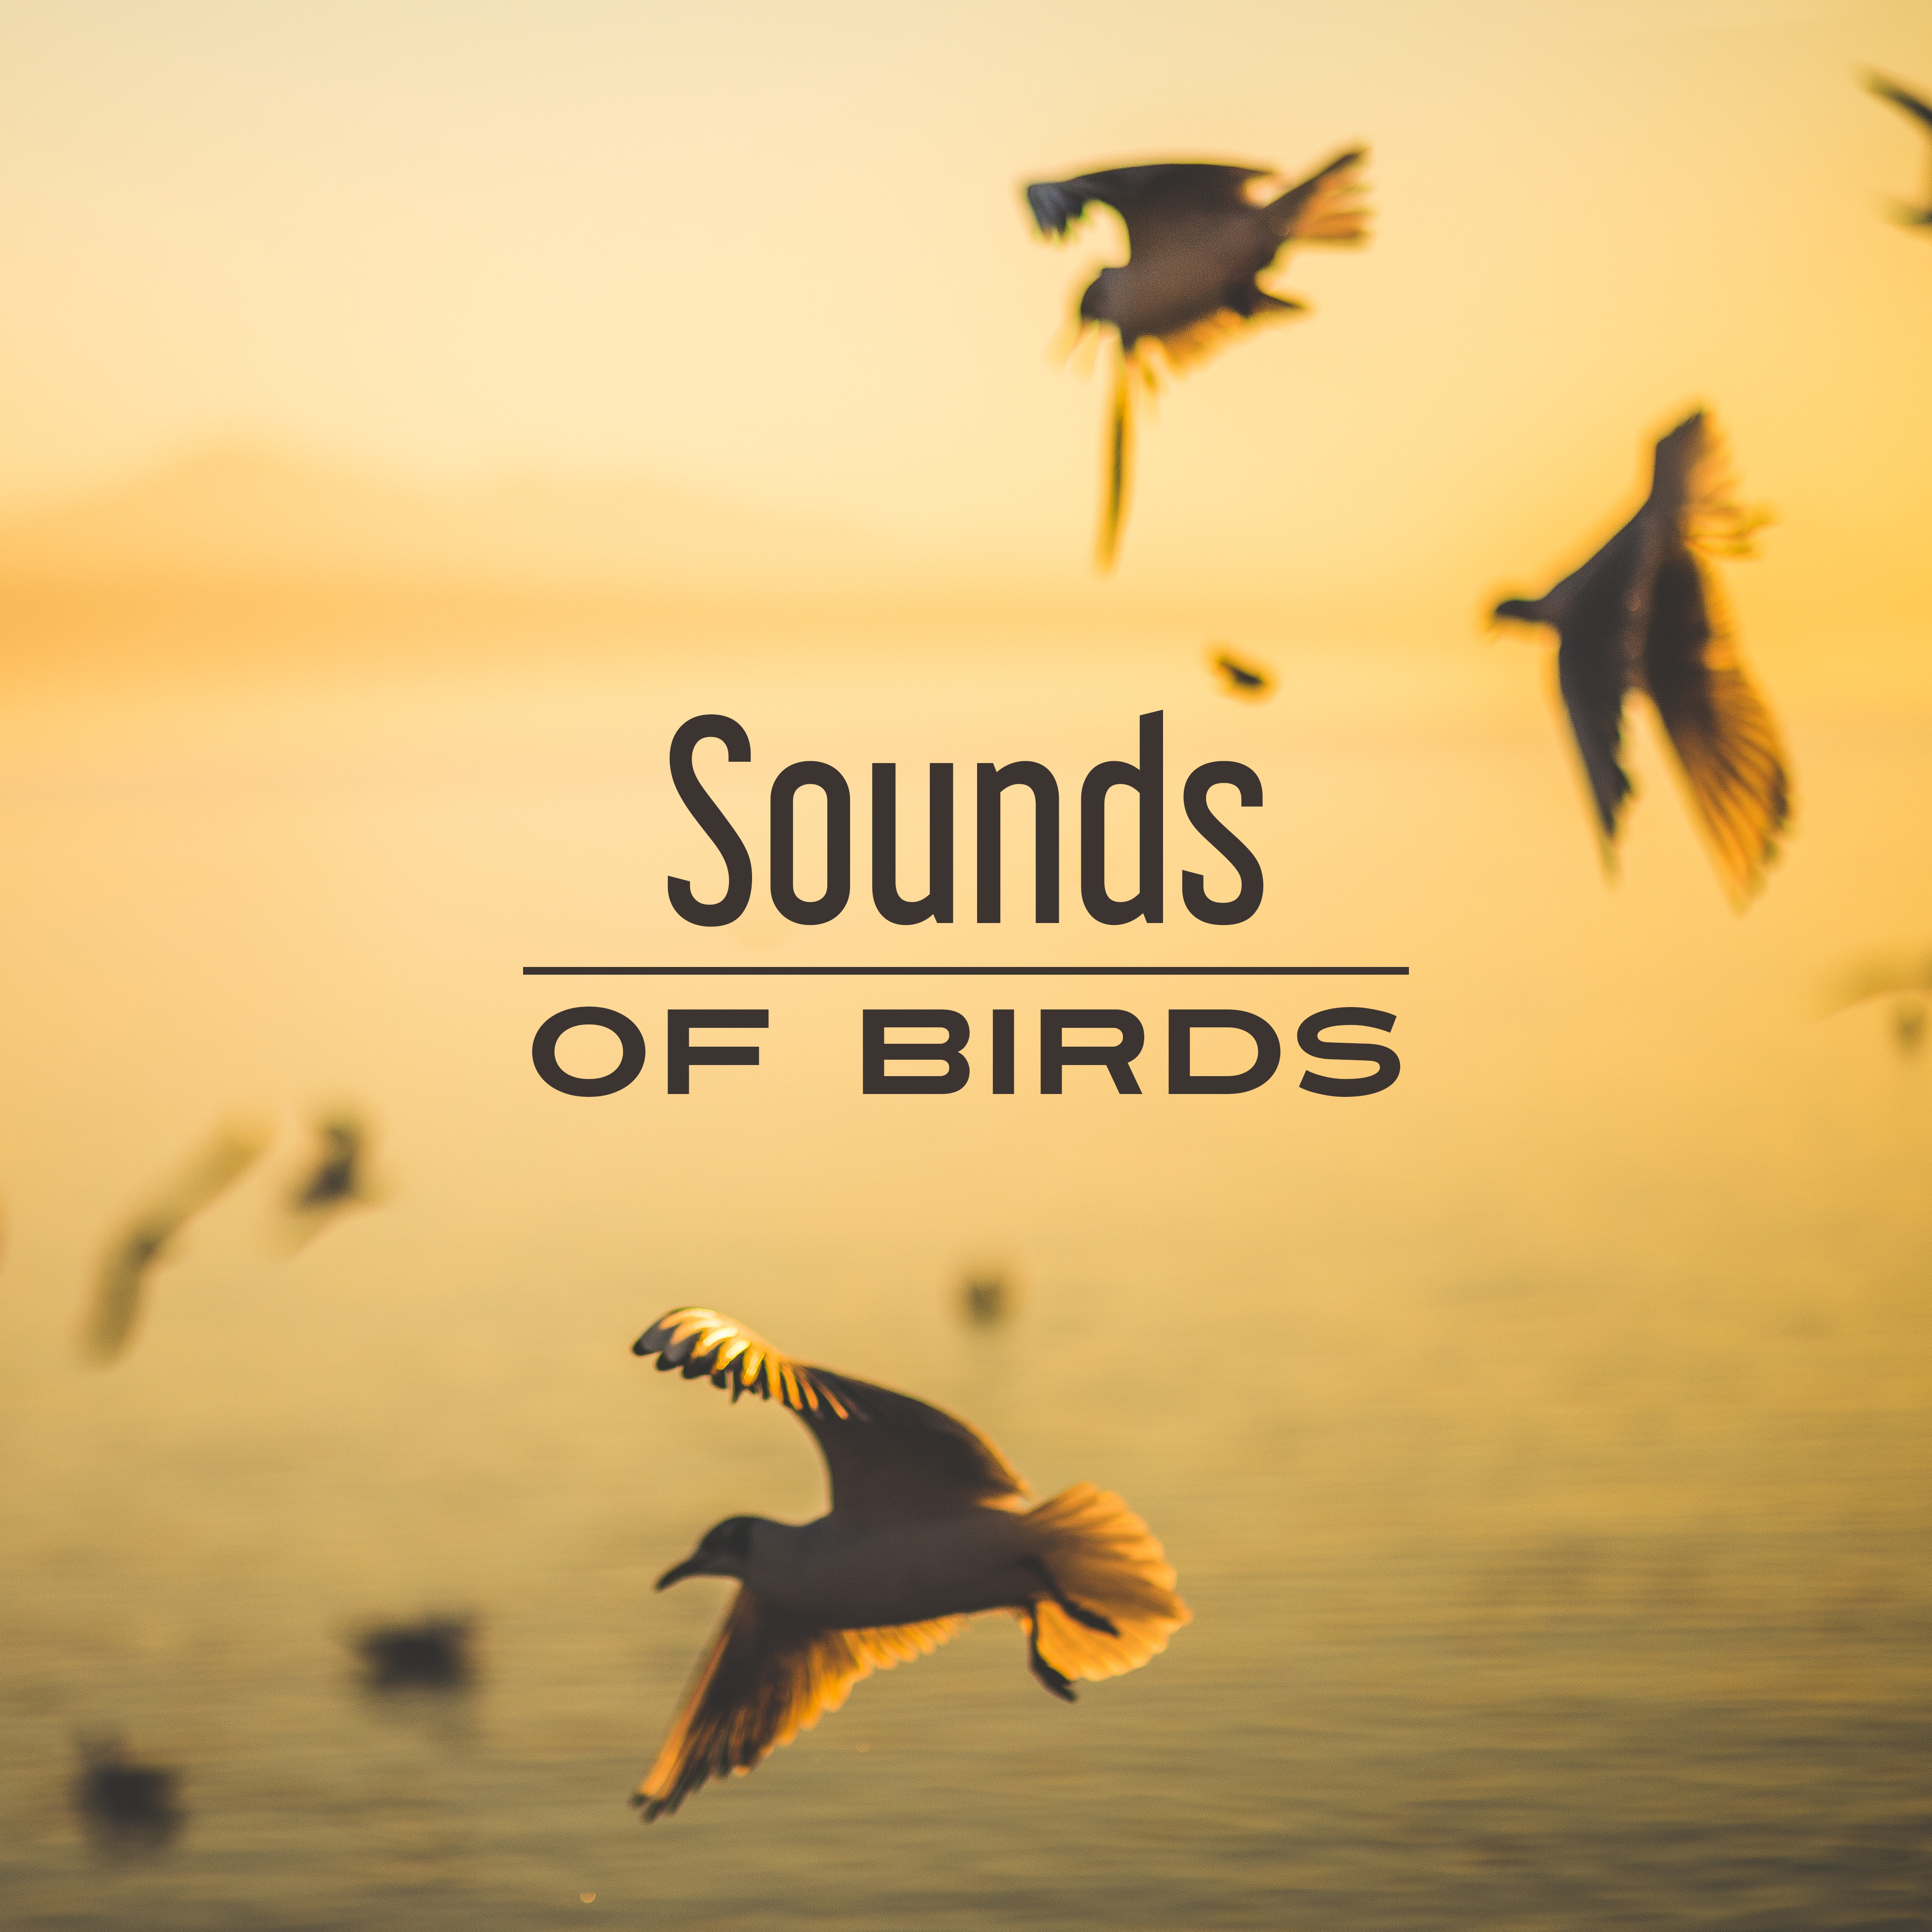 Sounds of Birds  Relaxing Therapy for Mind, Deep Sleep, Peaceful Music, Rest, Calmness, Relaxation, Harmony, Nature Sounds